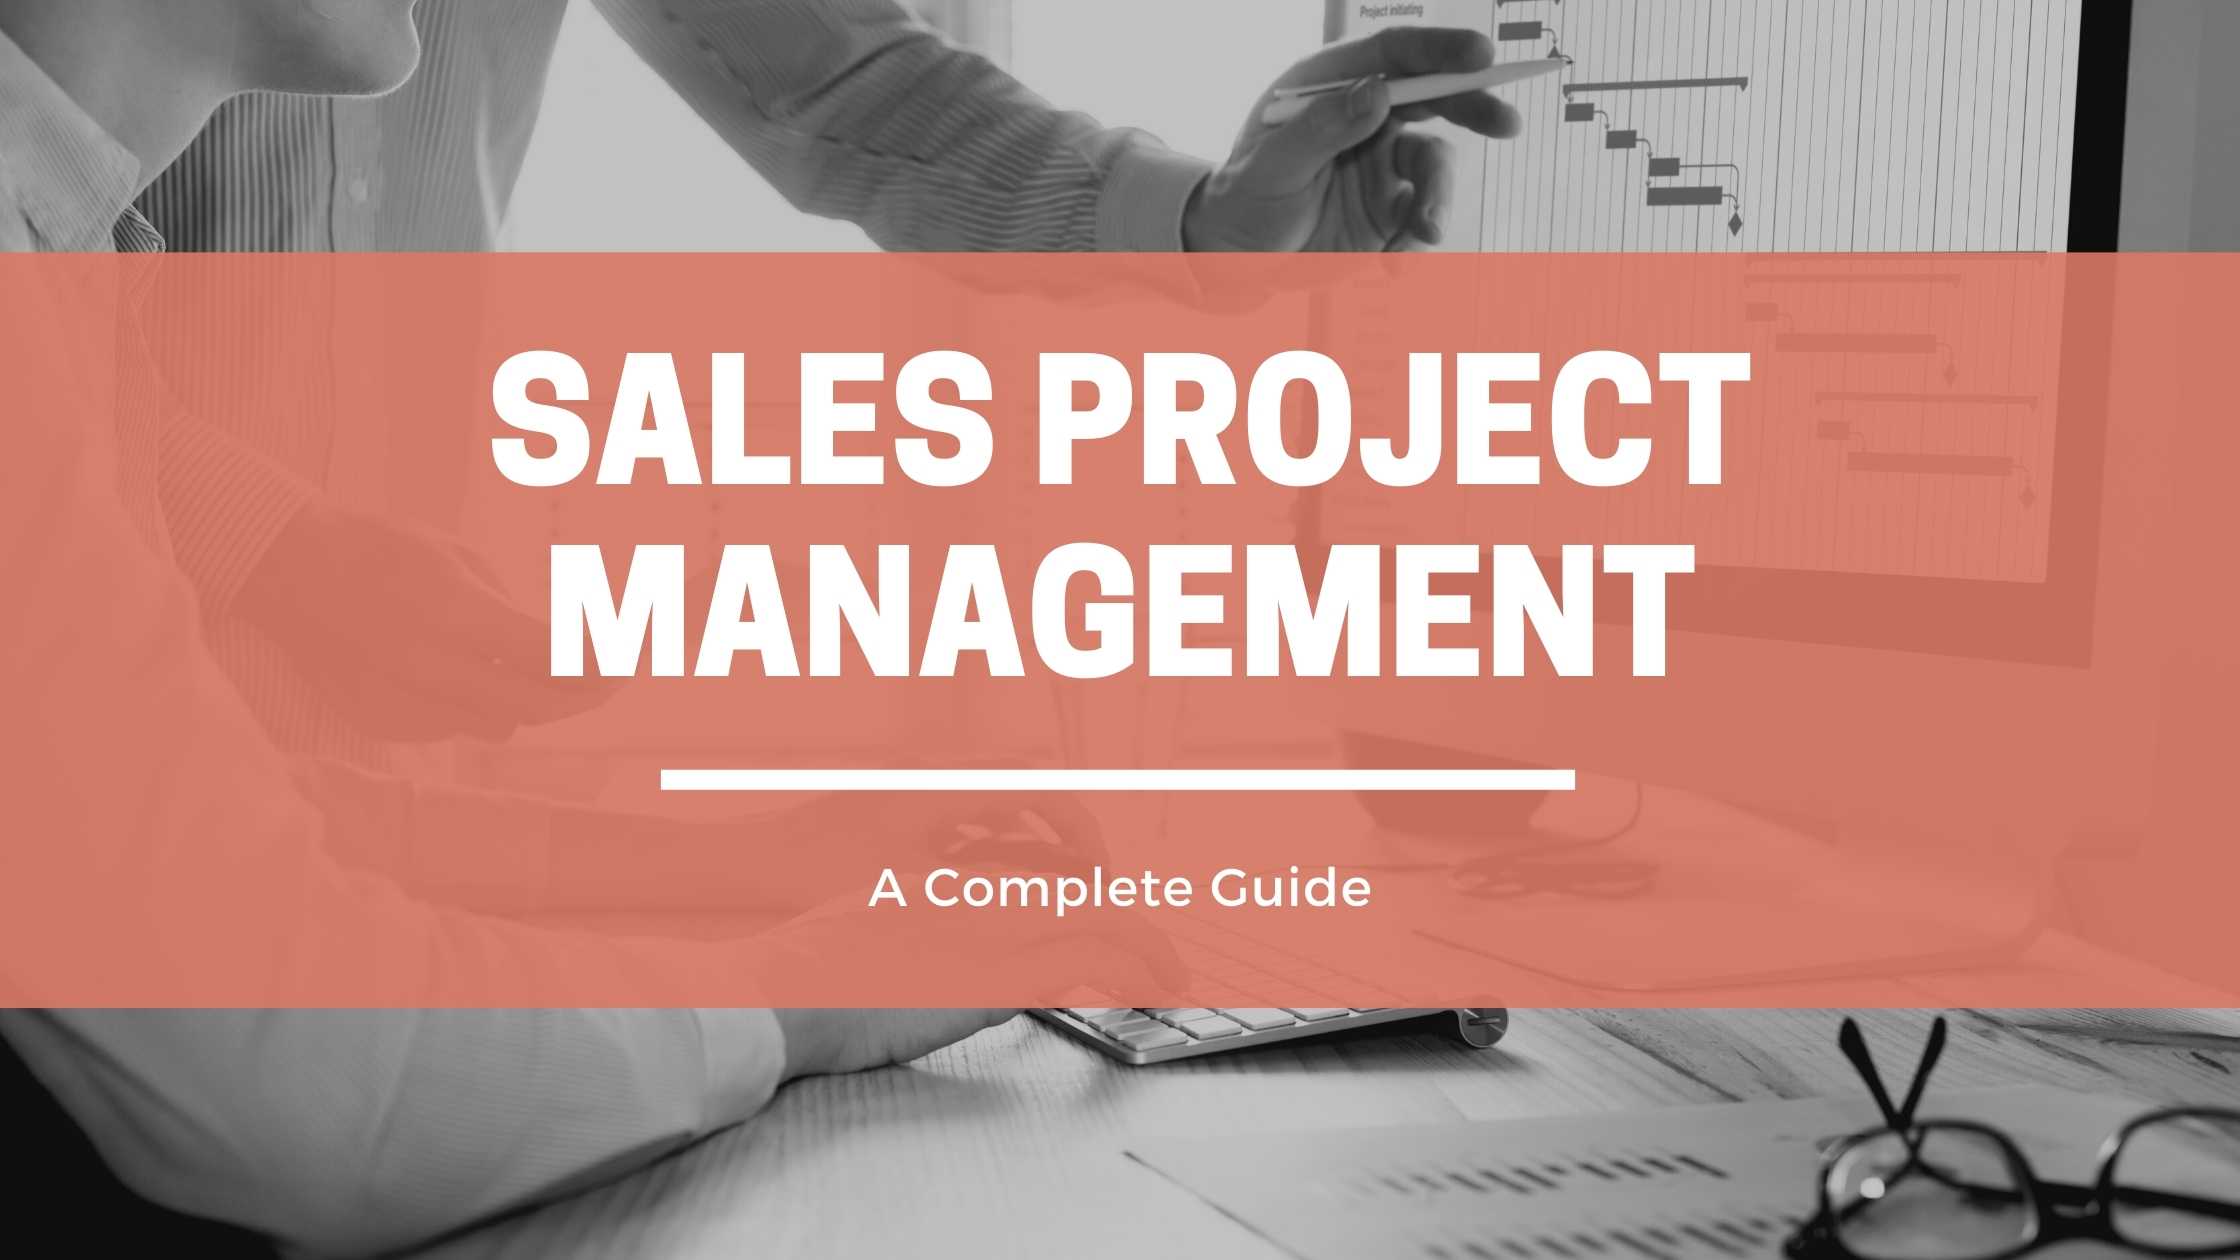 Sales project management title image with project manager in background.